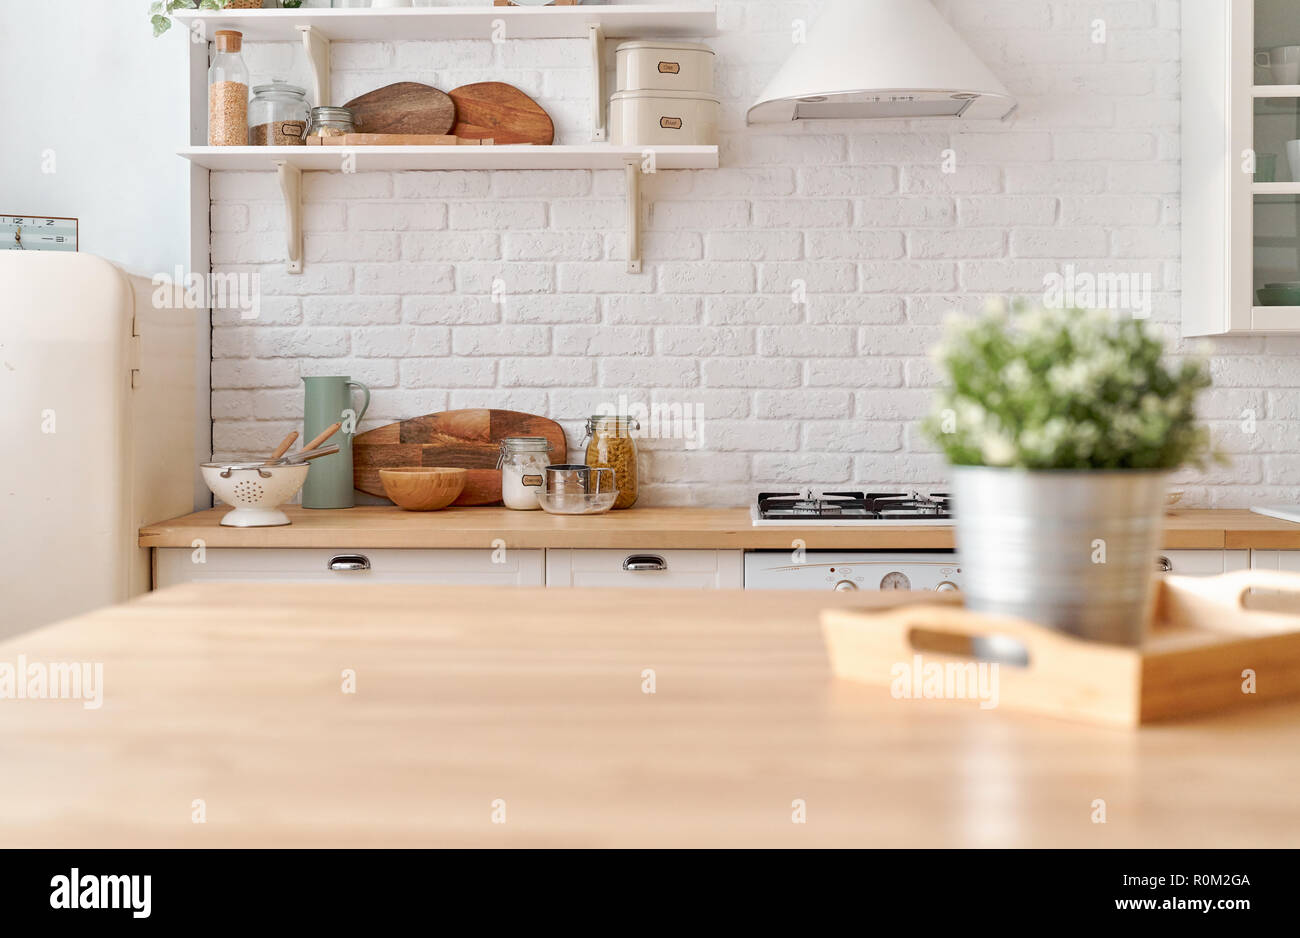 stock image of a kitchen table